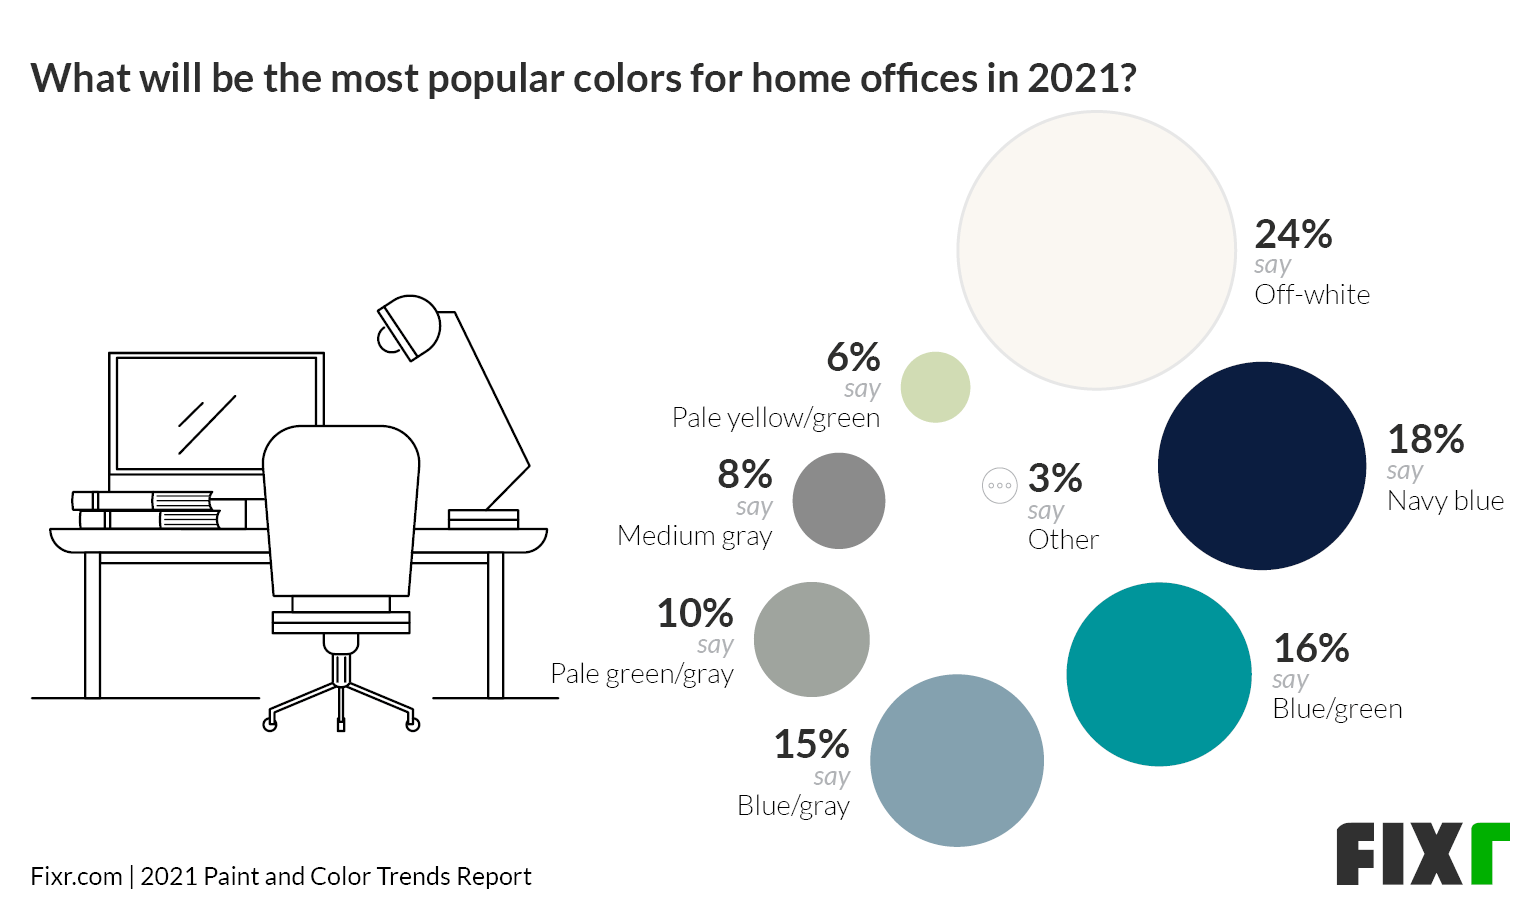 Paint & Color Trends 2021 - Most Popular Colors for Home Offices in 2021